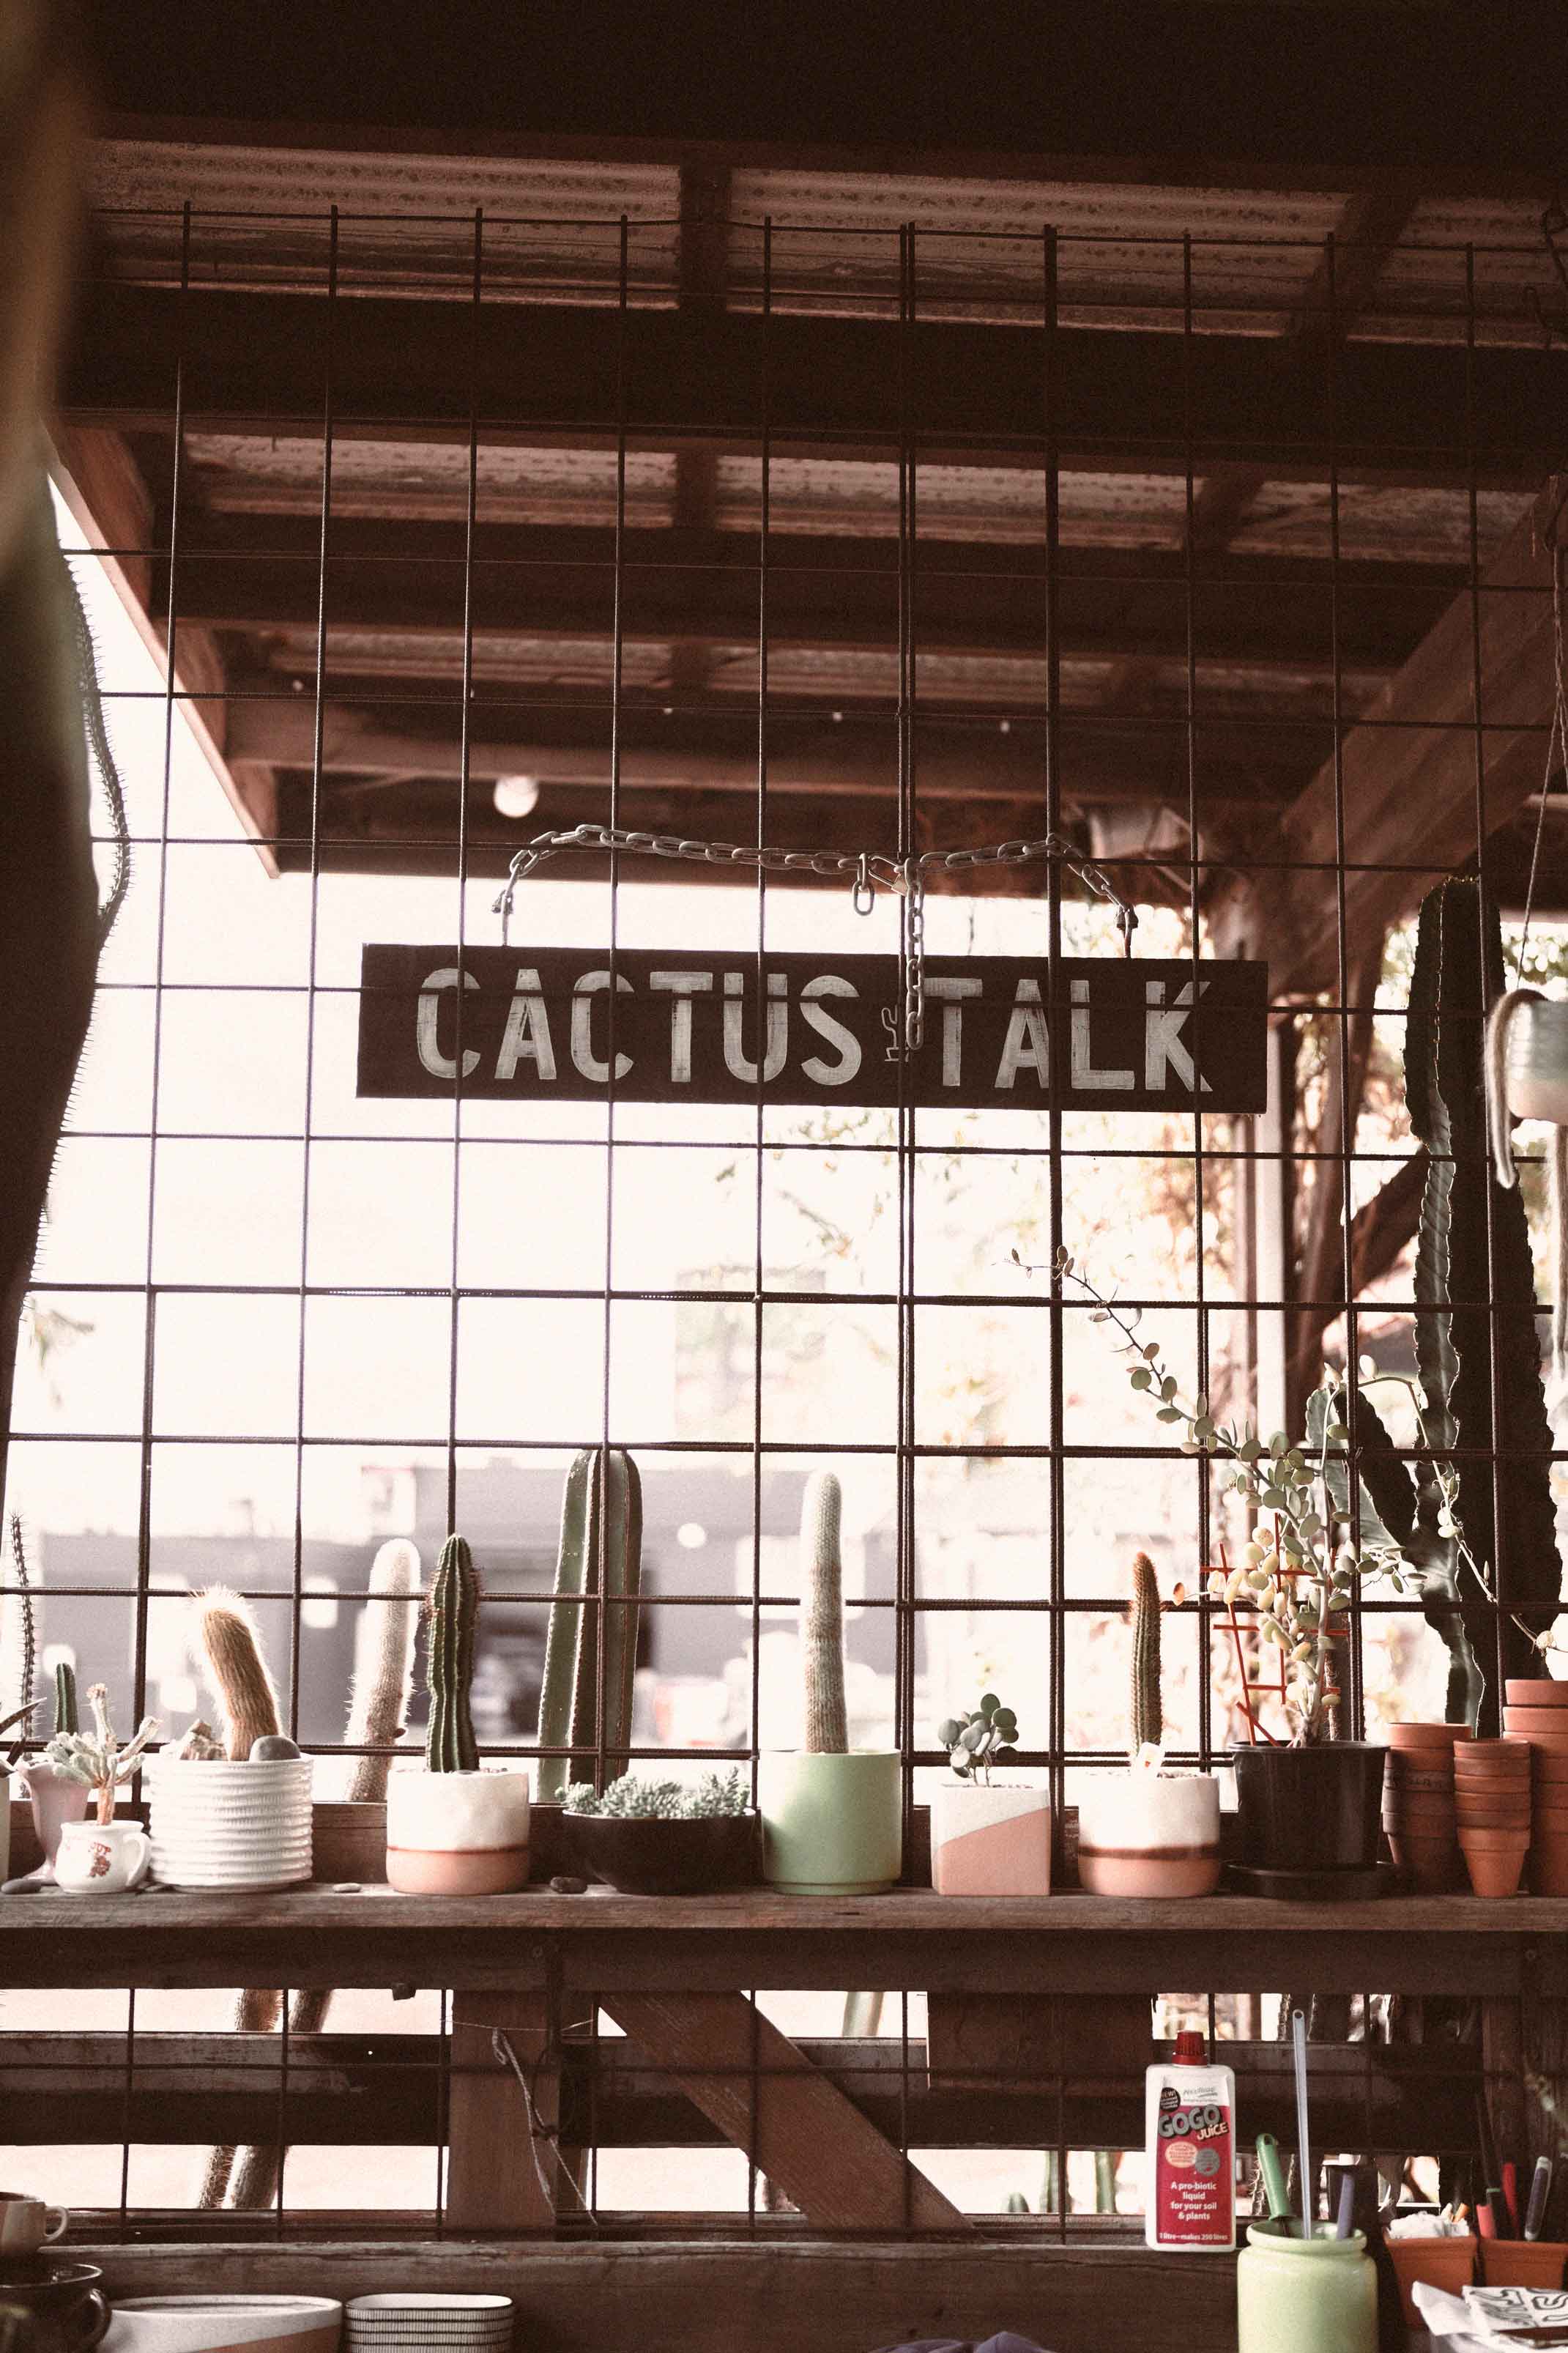 The Brightside: With Cactus Talk